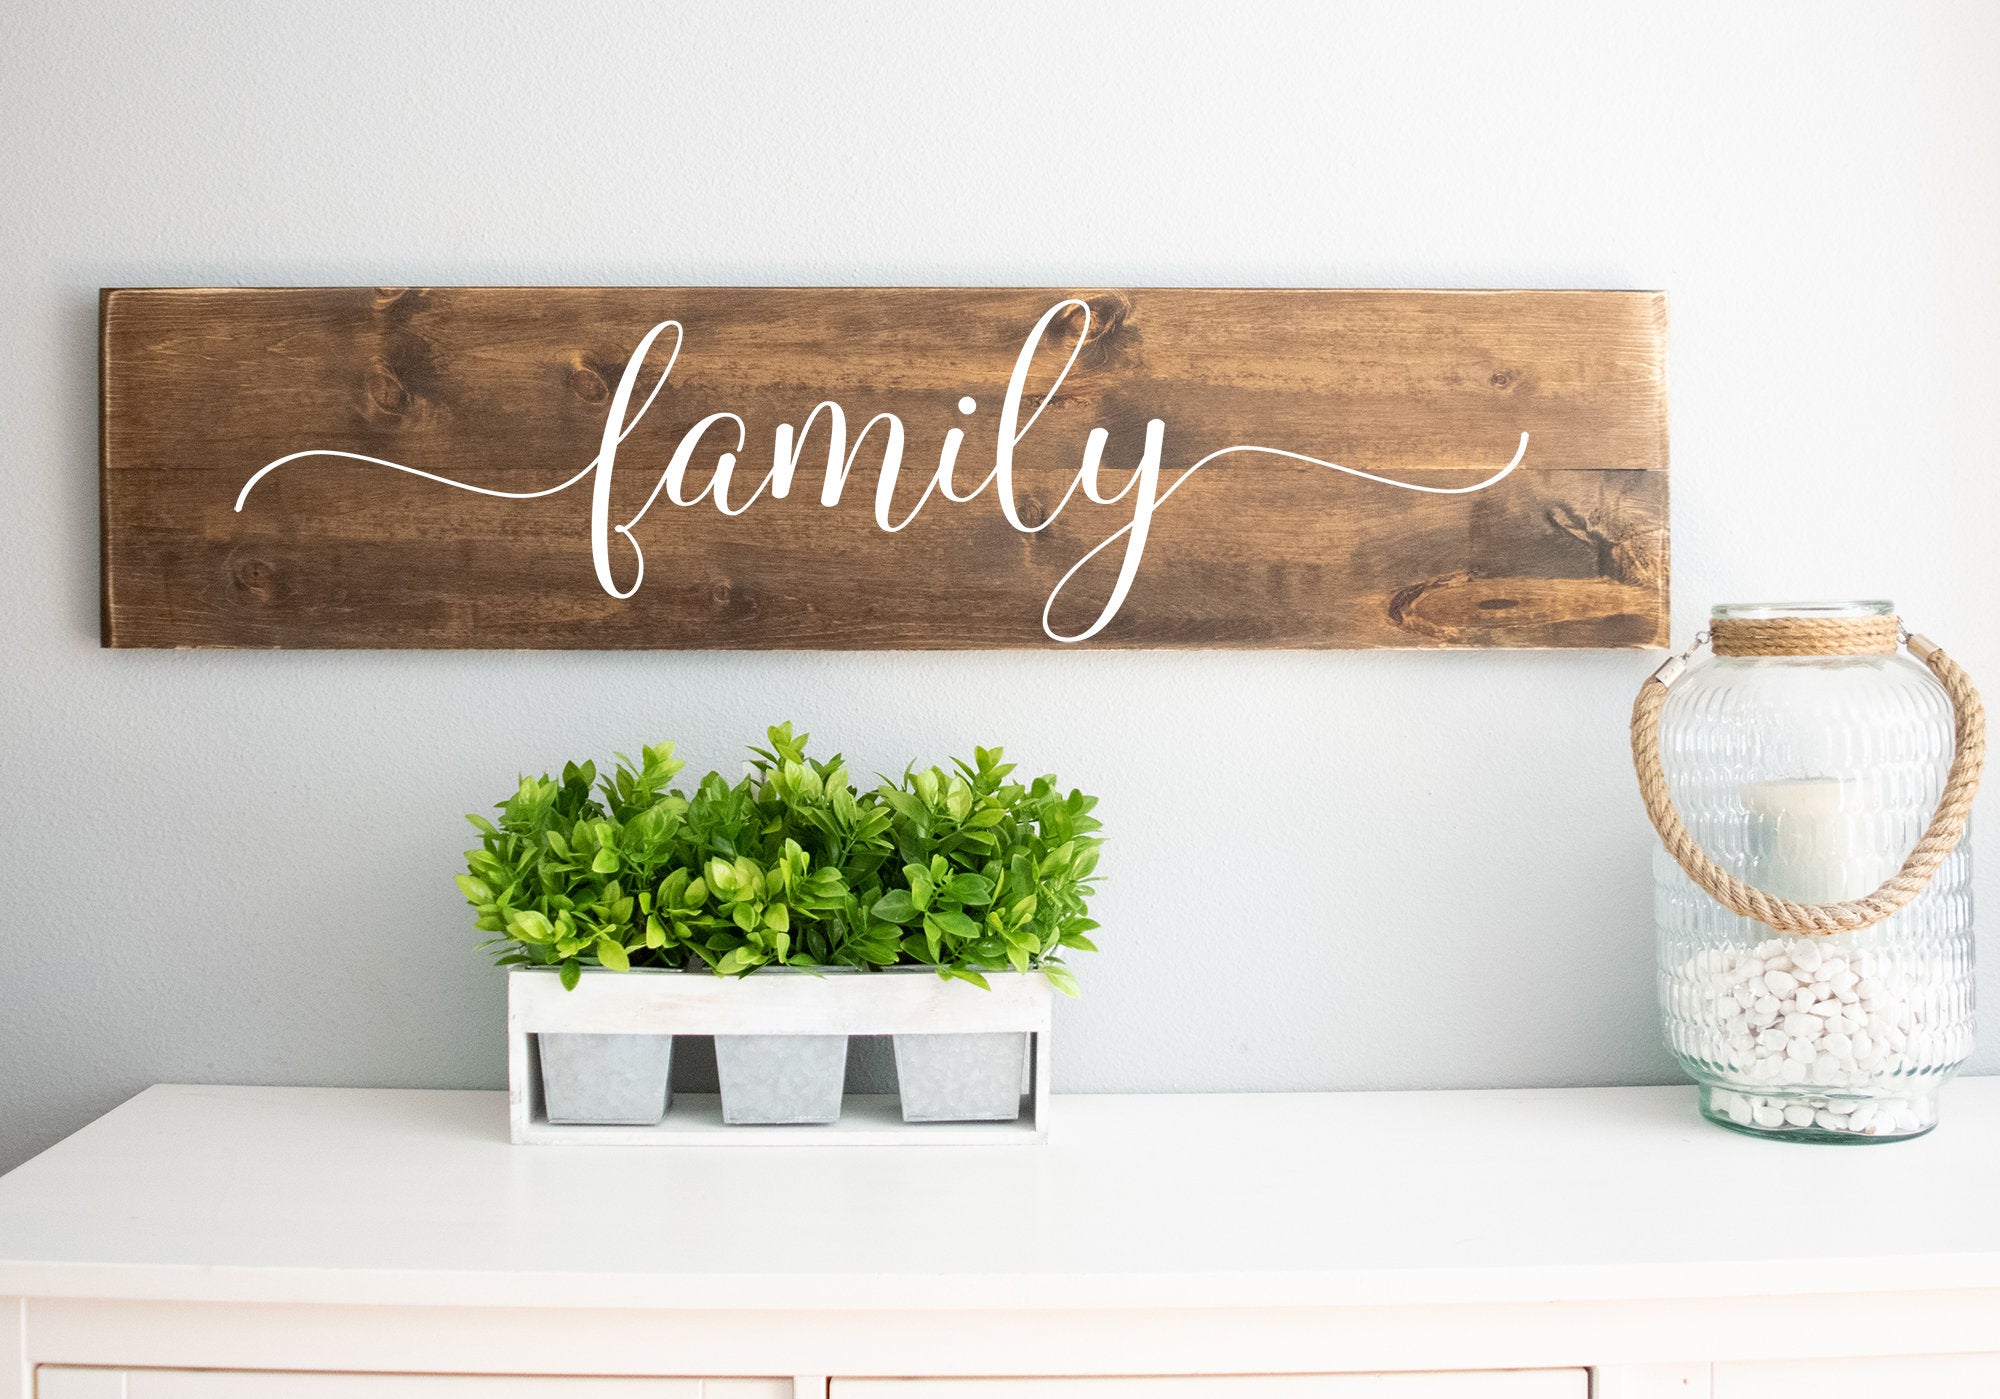 Family Wood Sign,  Farmhouse Wooden Sayings Wall Décor, Farmhouse Wall Hangings, Wood Wall Art, Large Wood Sign, Large Rustic Wall Decor